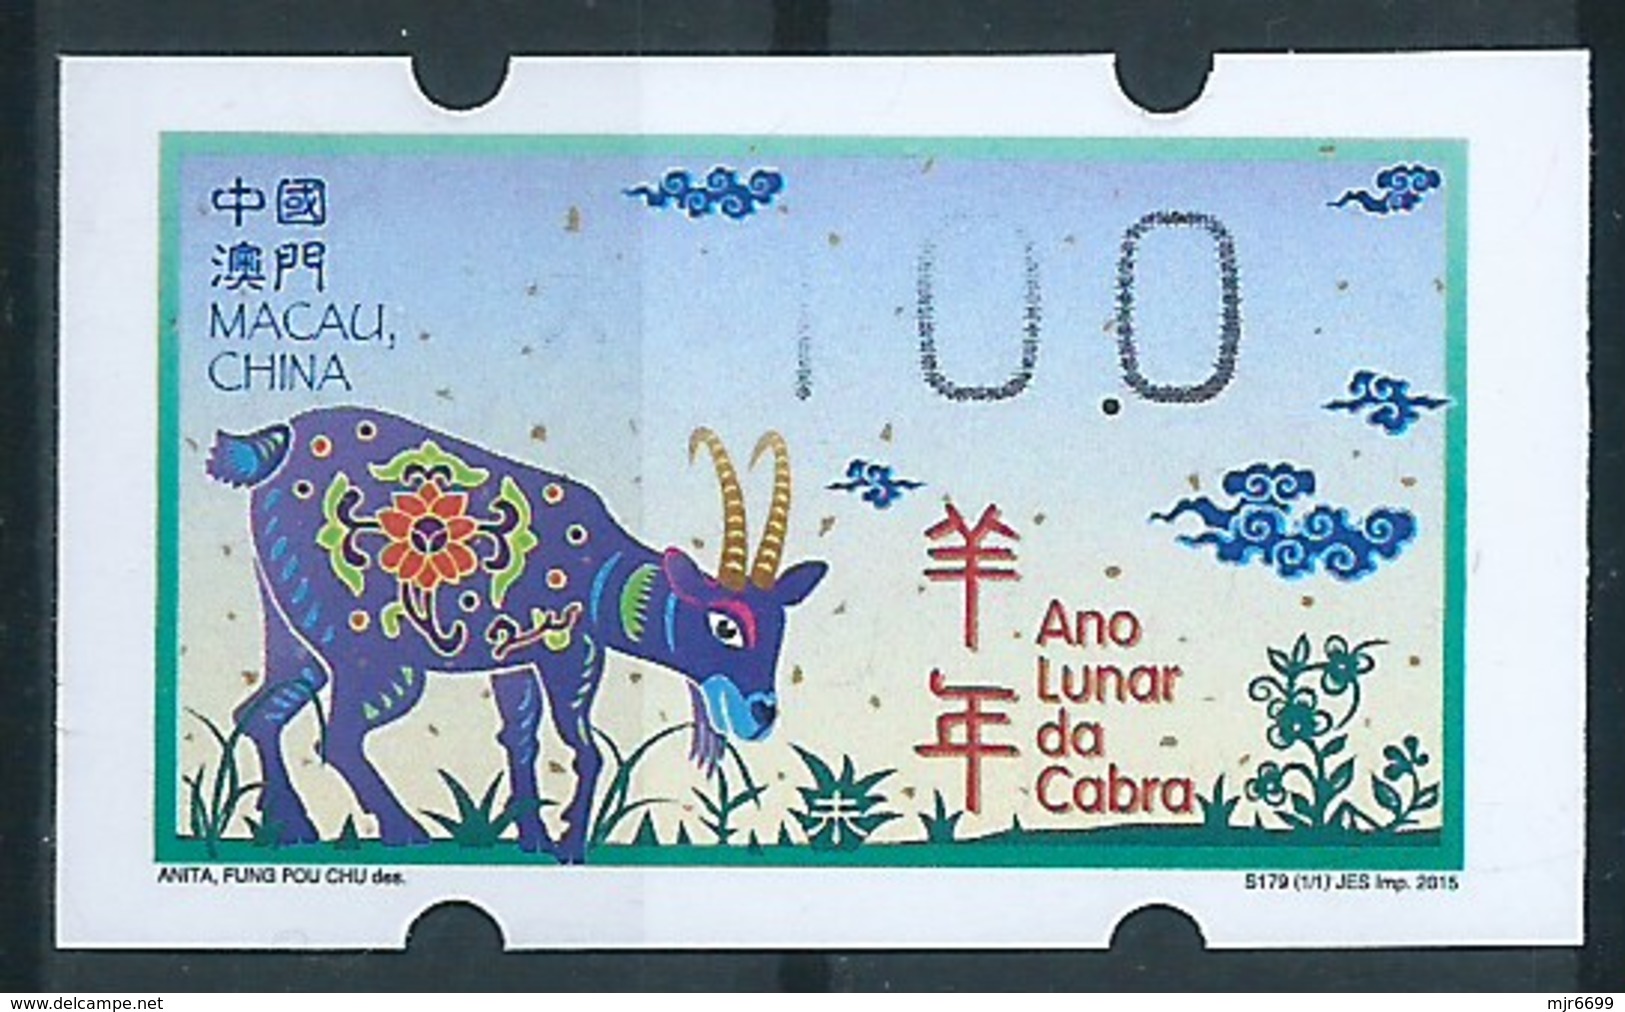 MACAU 2015 LUNAR NEW YEAR OF THE GOAT ATM LABELS ERROR PRINT - PARTLY NO INK PRINT, ALMOST MISSING '1' & "STARS" - Distributeurs